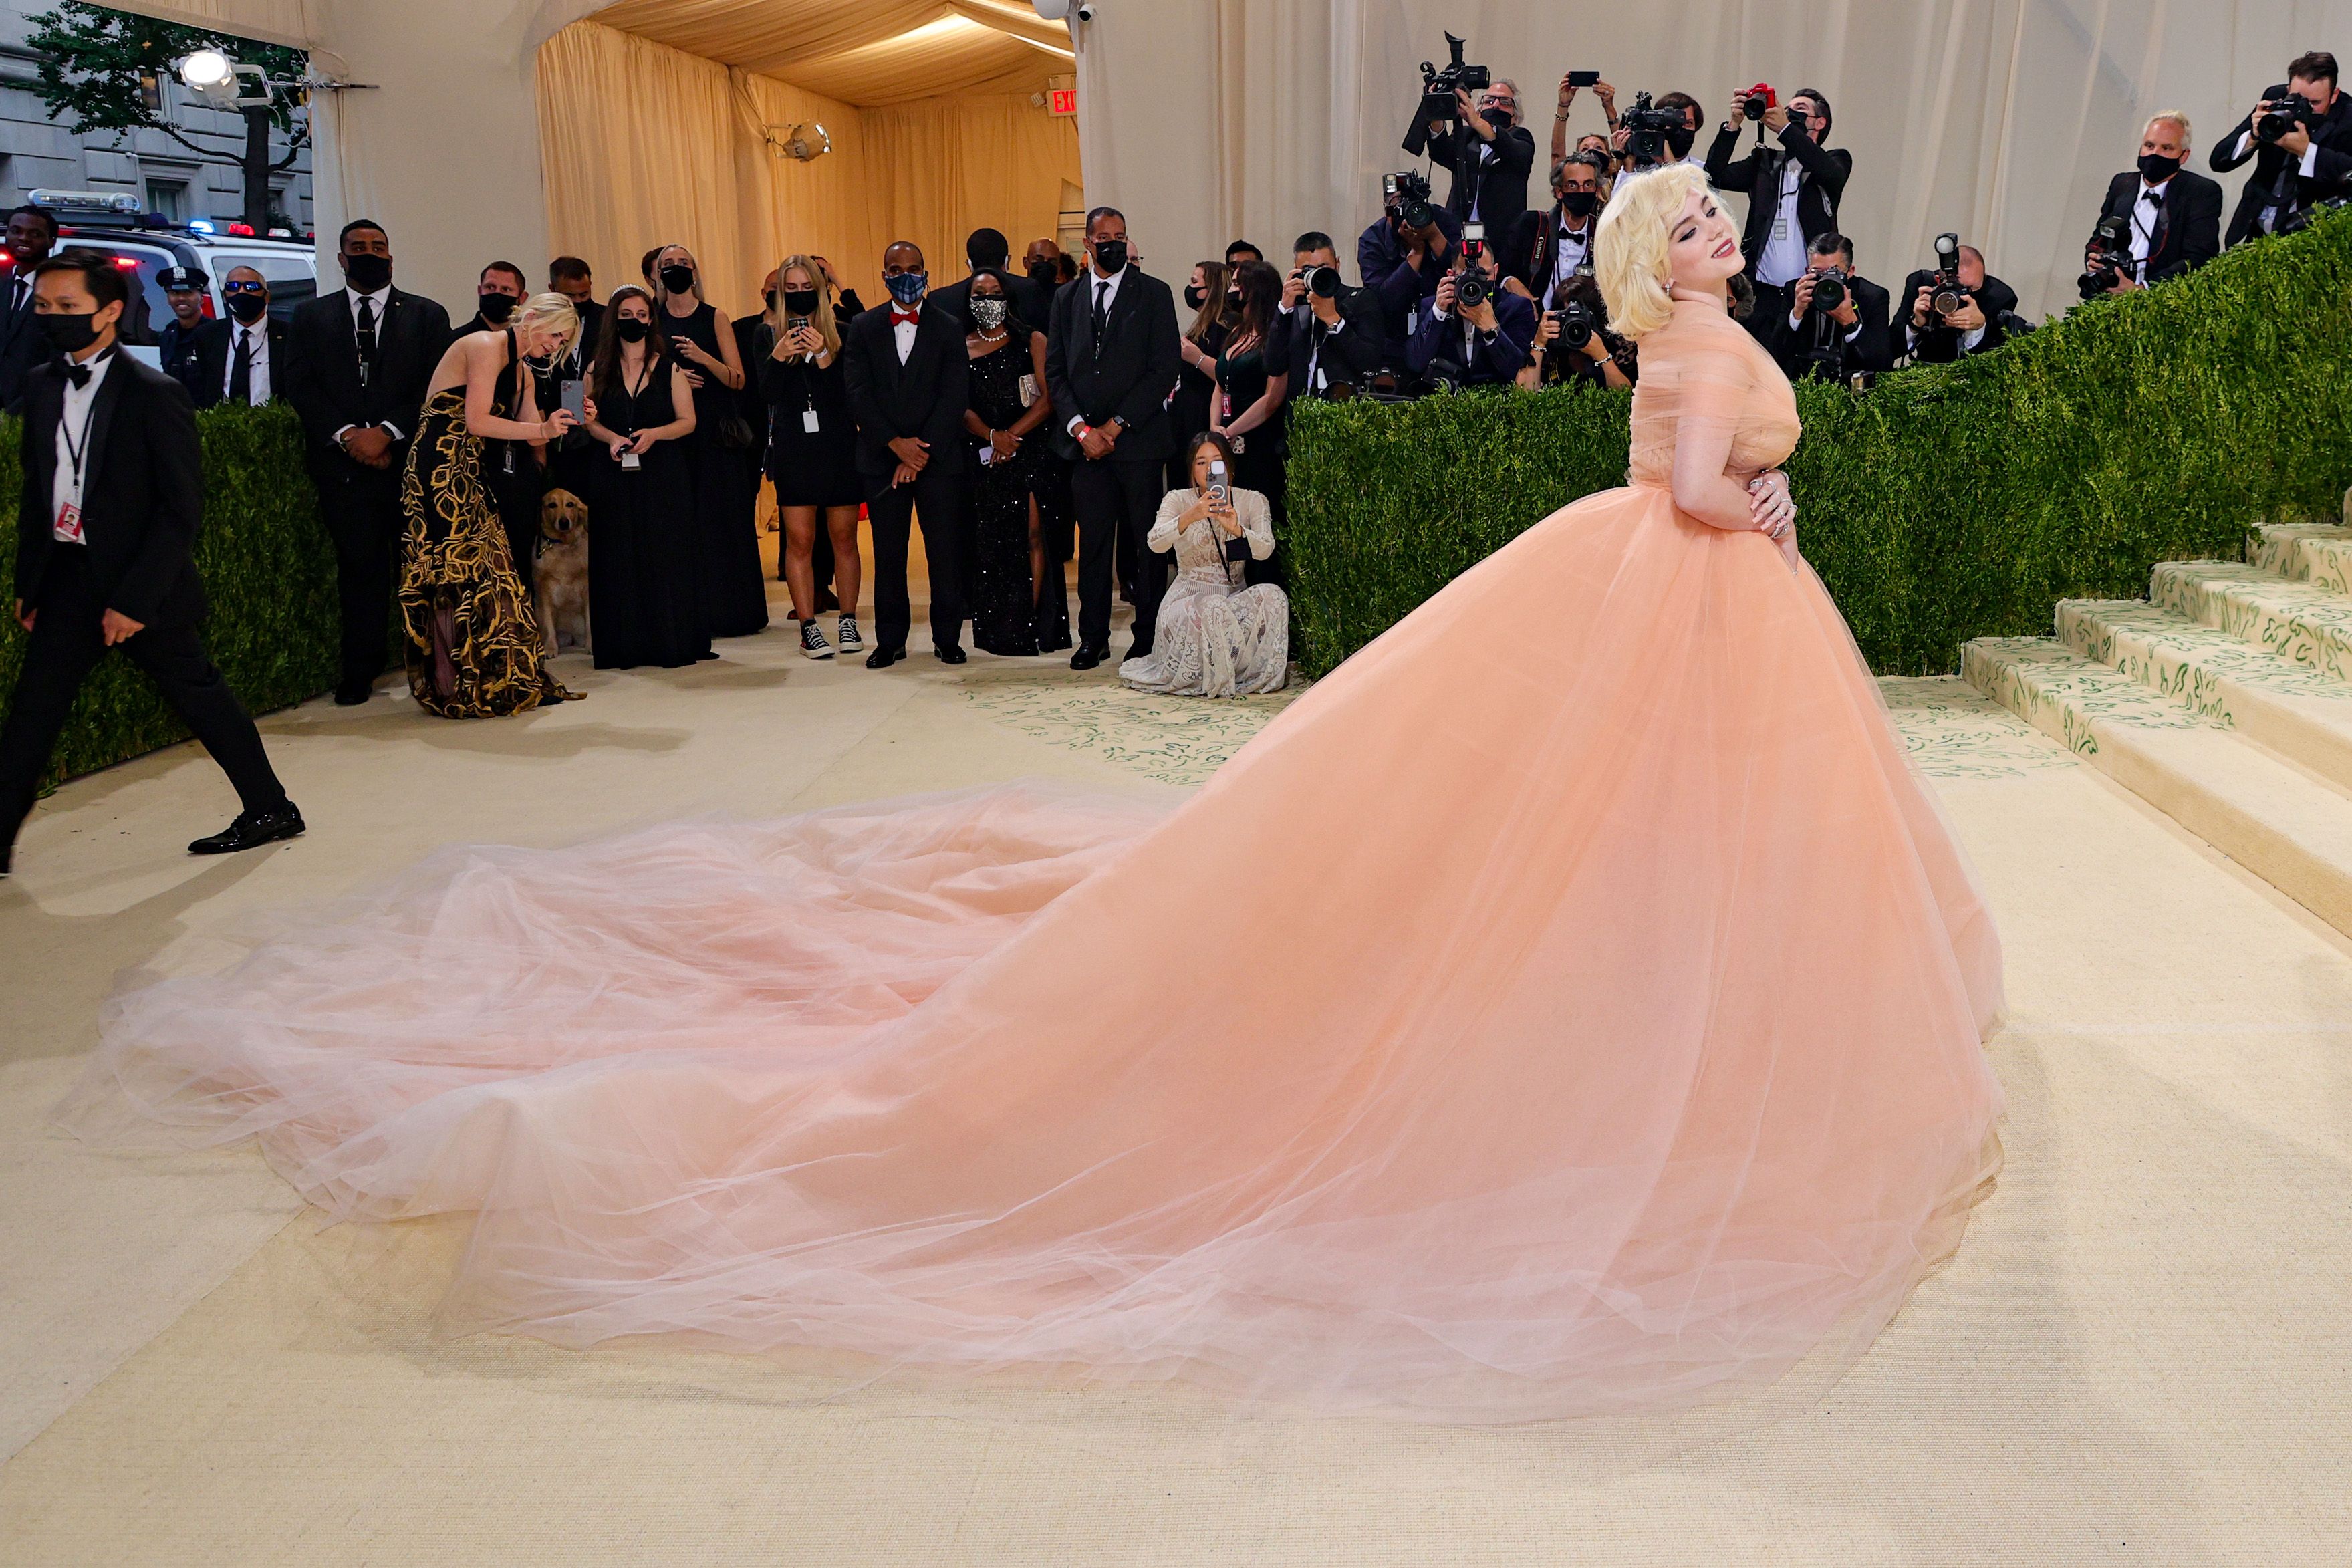 Billie Eilish Wore A Massive Barbie-Inspired Ball Gown At the 2021 Met Gala